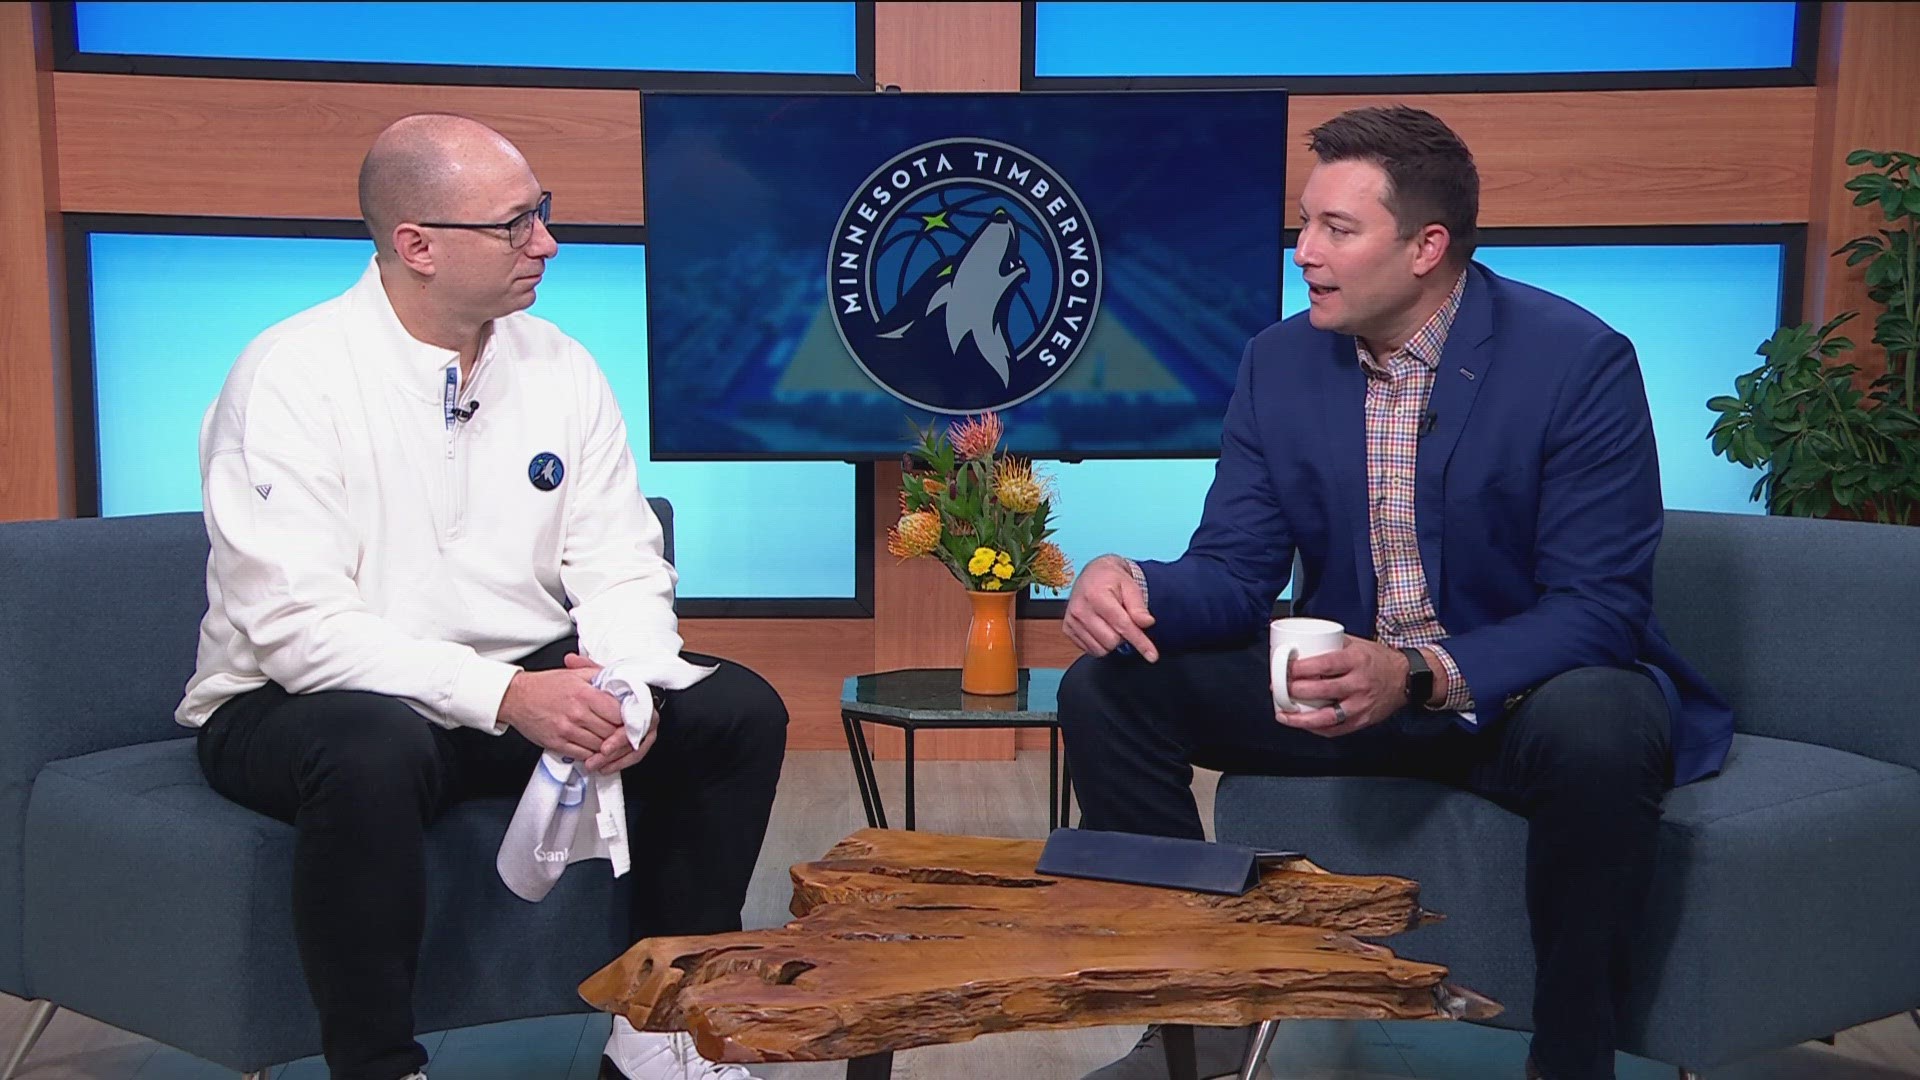 Jake Vernon, senior vice president of ticket sales & service for the Timberwolves, joined KARE 11 Saturday to discuss what fans can expect for the playoffs.